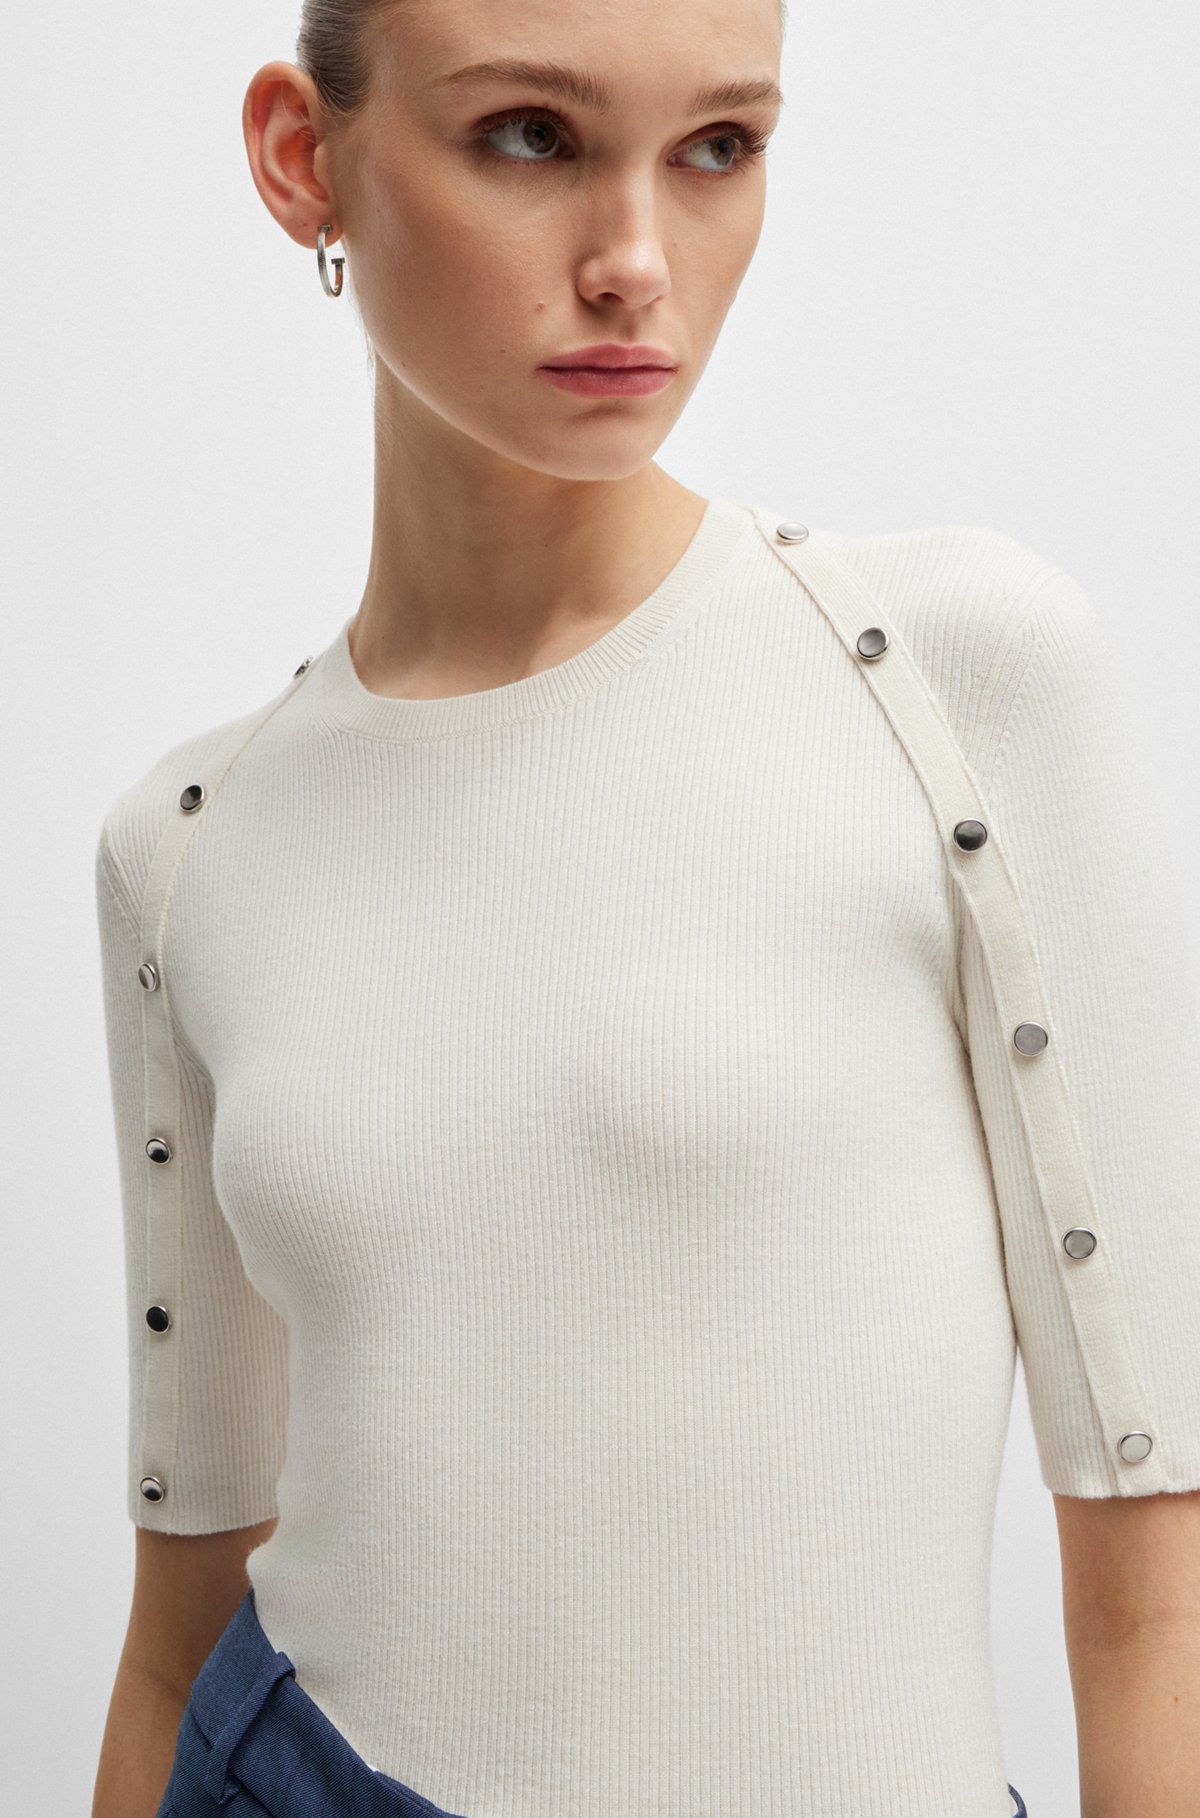 Short-sleeved sweater in stretch fabric with hardware details, White